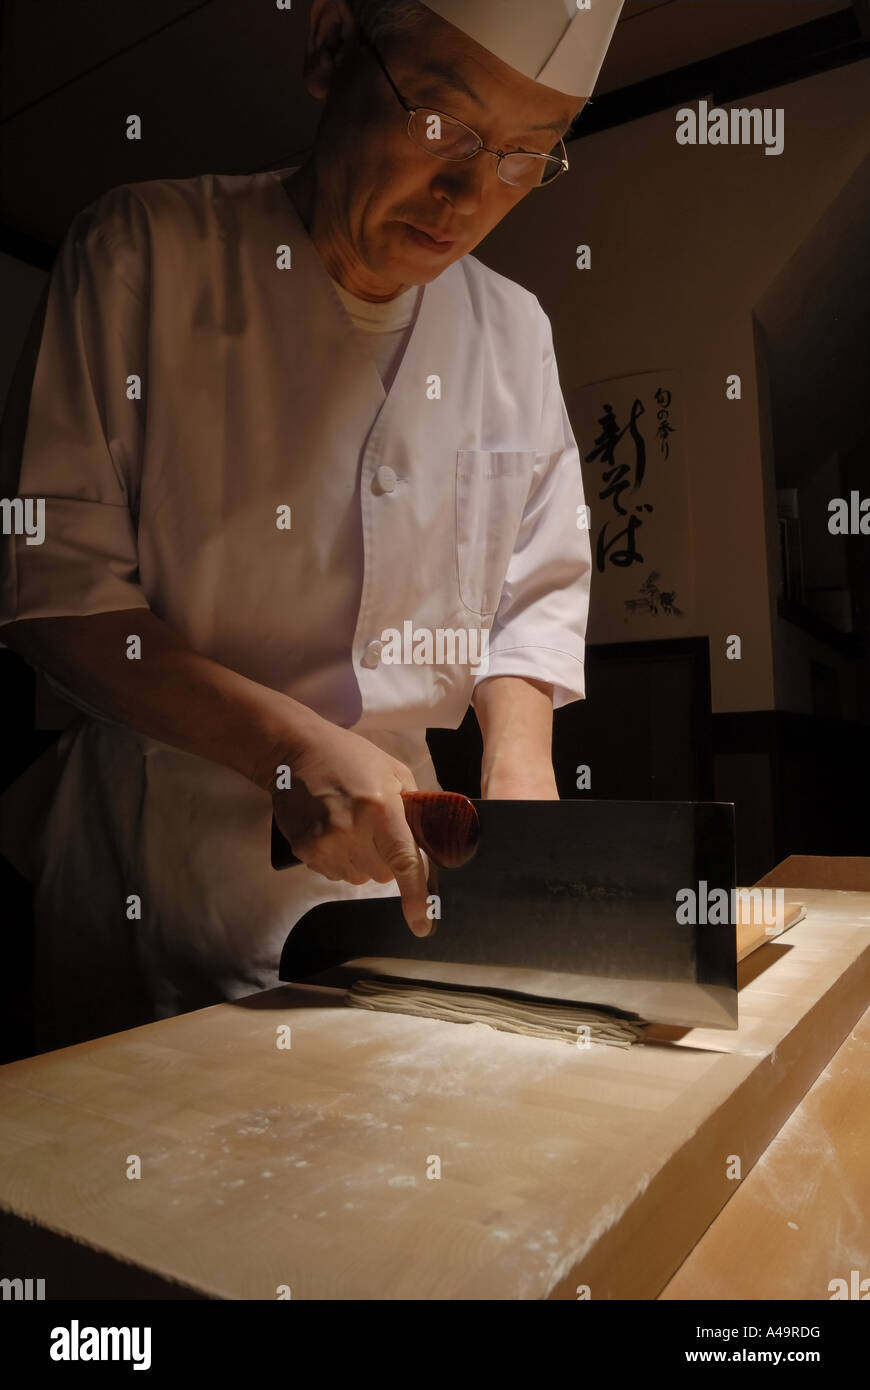 Close up of a chef cutting noodles Stock Photo